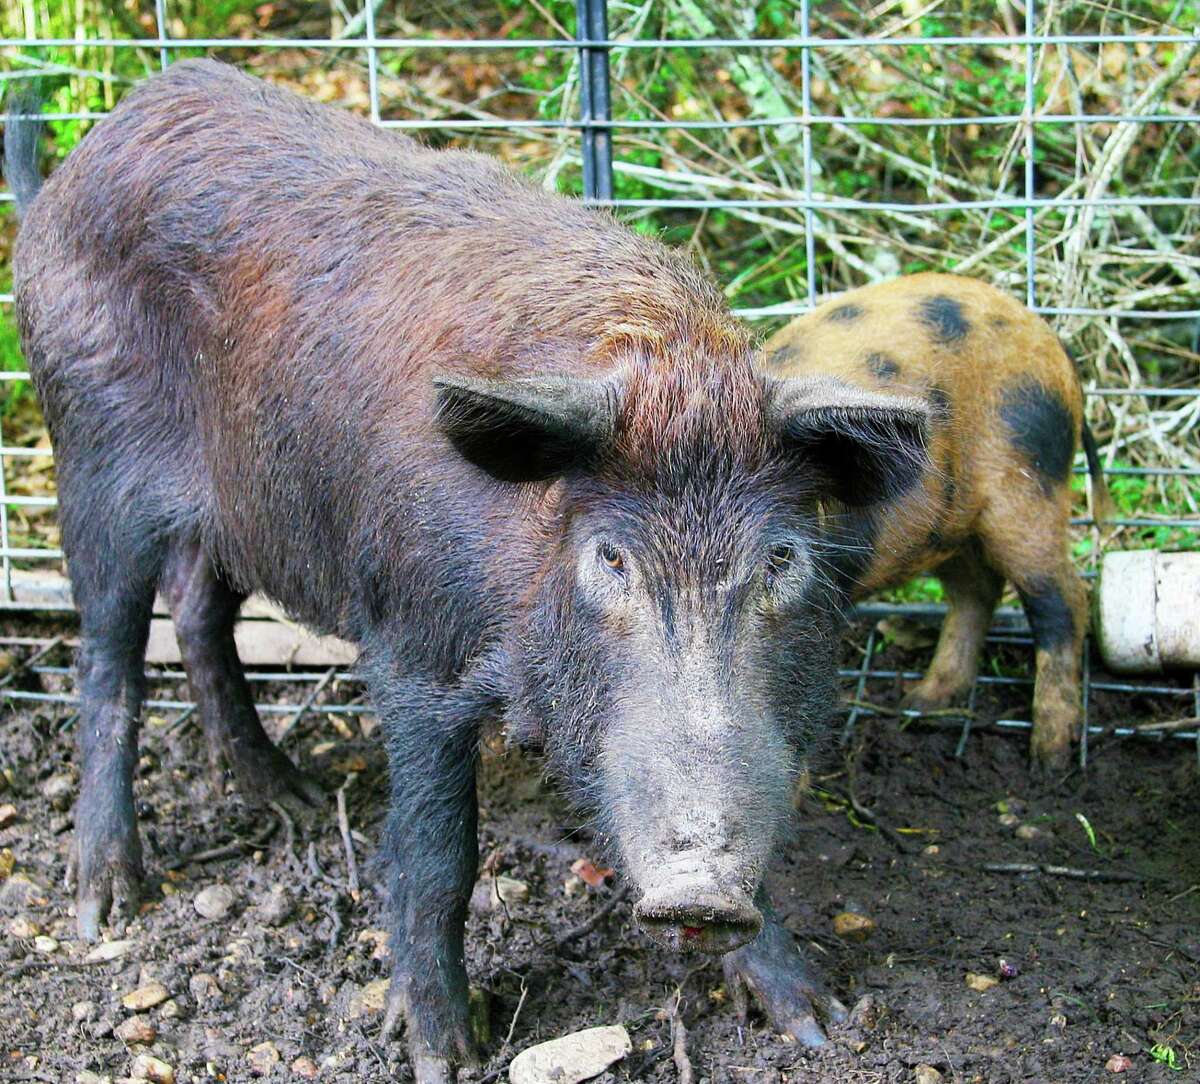 Scimetrics has decide to pull Kaput Feral Hog Bait from use in Texas. The Texas A&M AgriLife Extension Service estimates Texas agriculture suffers about $52 million in damage annually from the hogs. Kaput Feral Hog Bait is laced with warfarin, a blood-thinner that in large doses causes hemorrhaging.